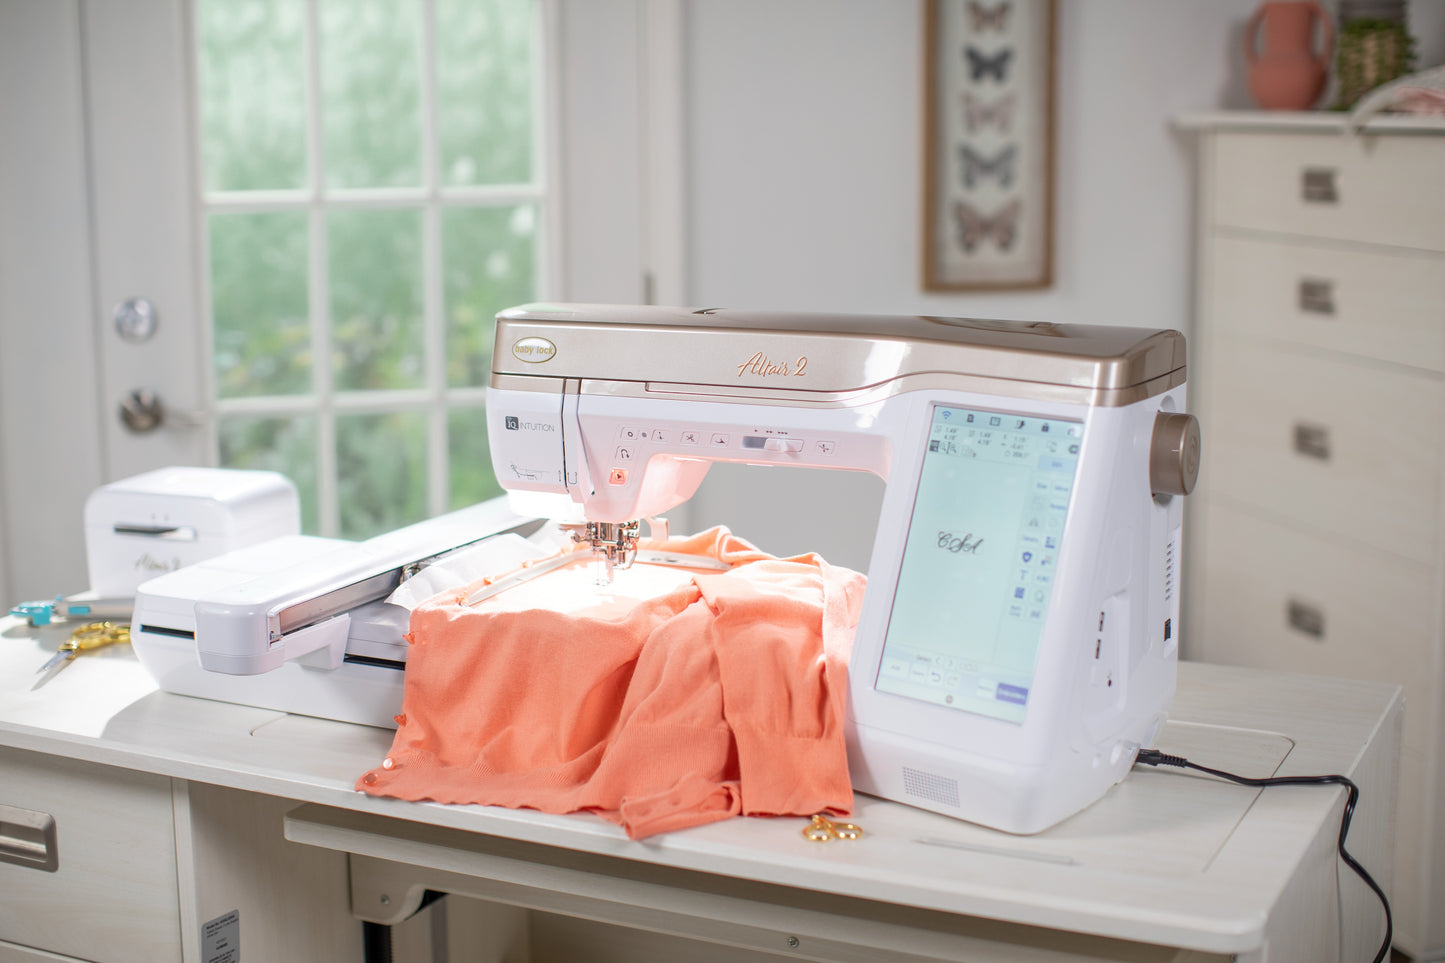 BabyLock Altair 2 Sewing and Embroidery machine